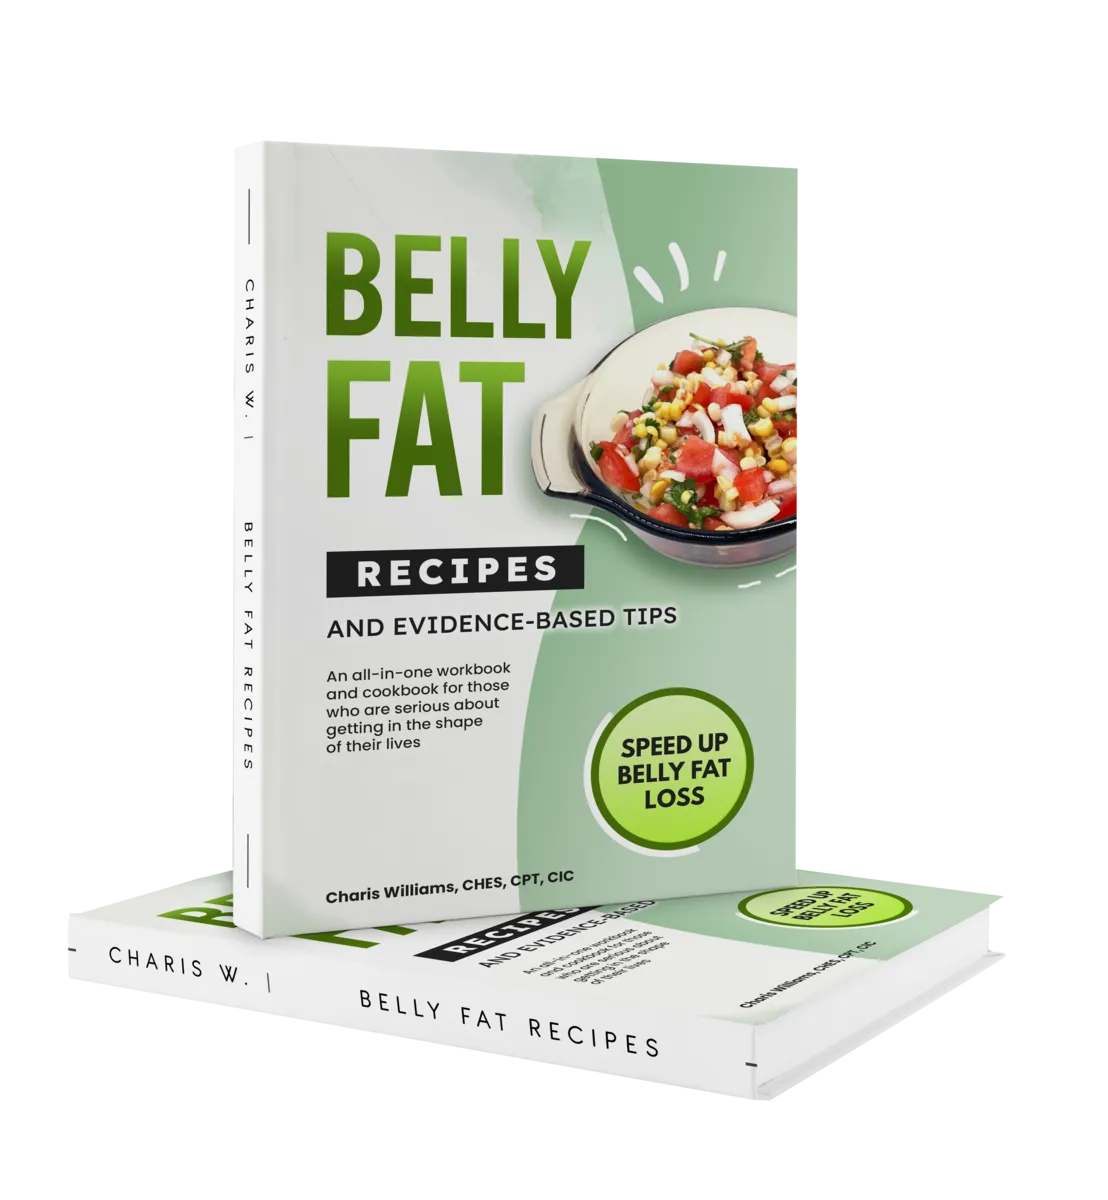 Belly Fat Recipes and Evidence-Based Tips E-book